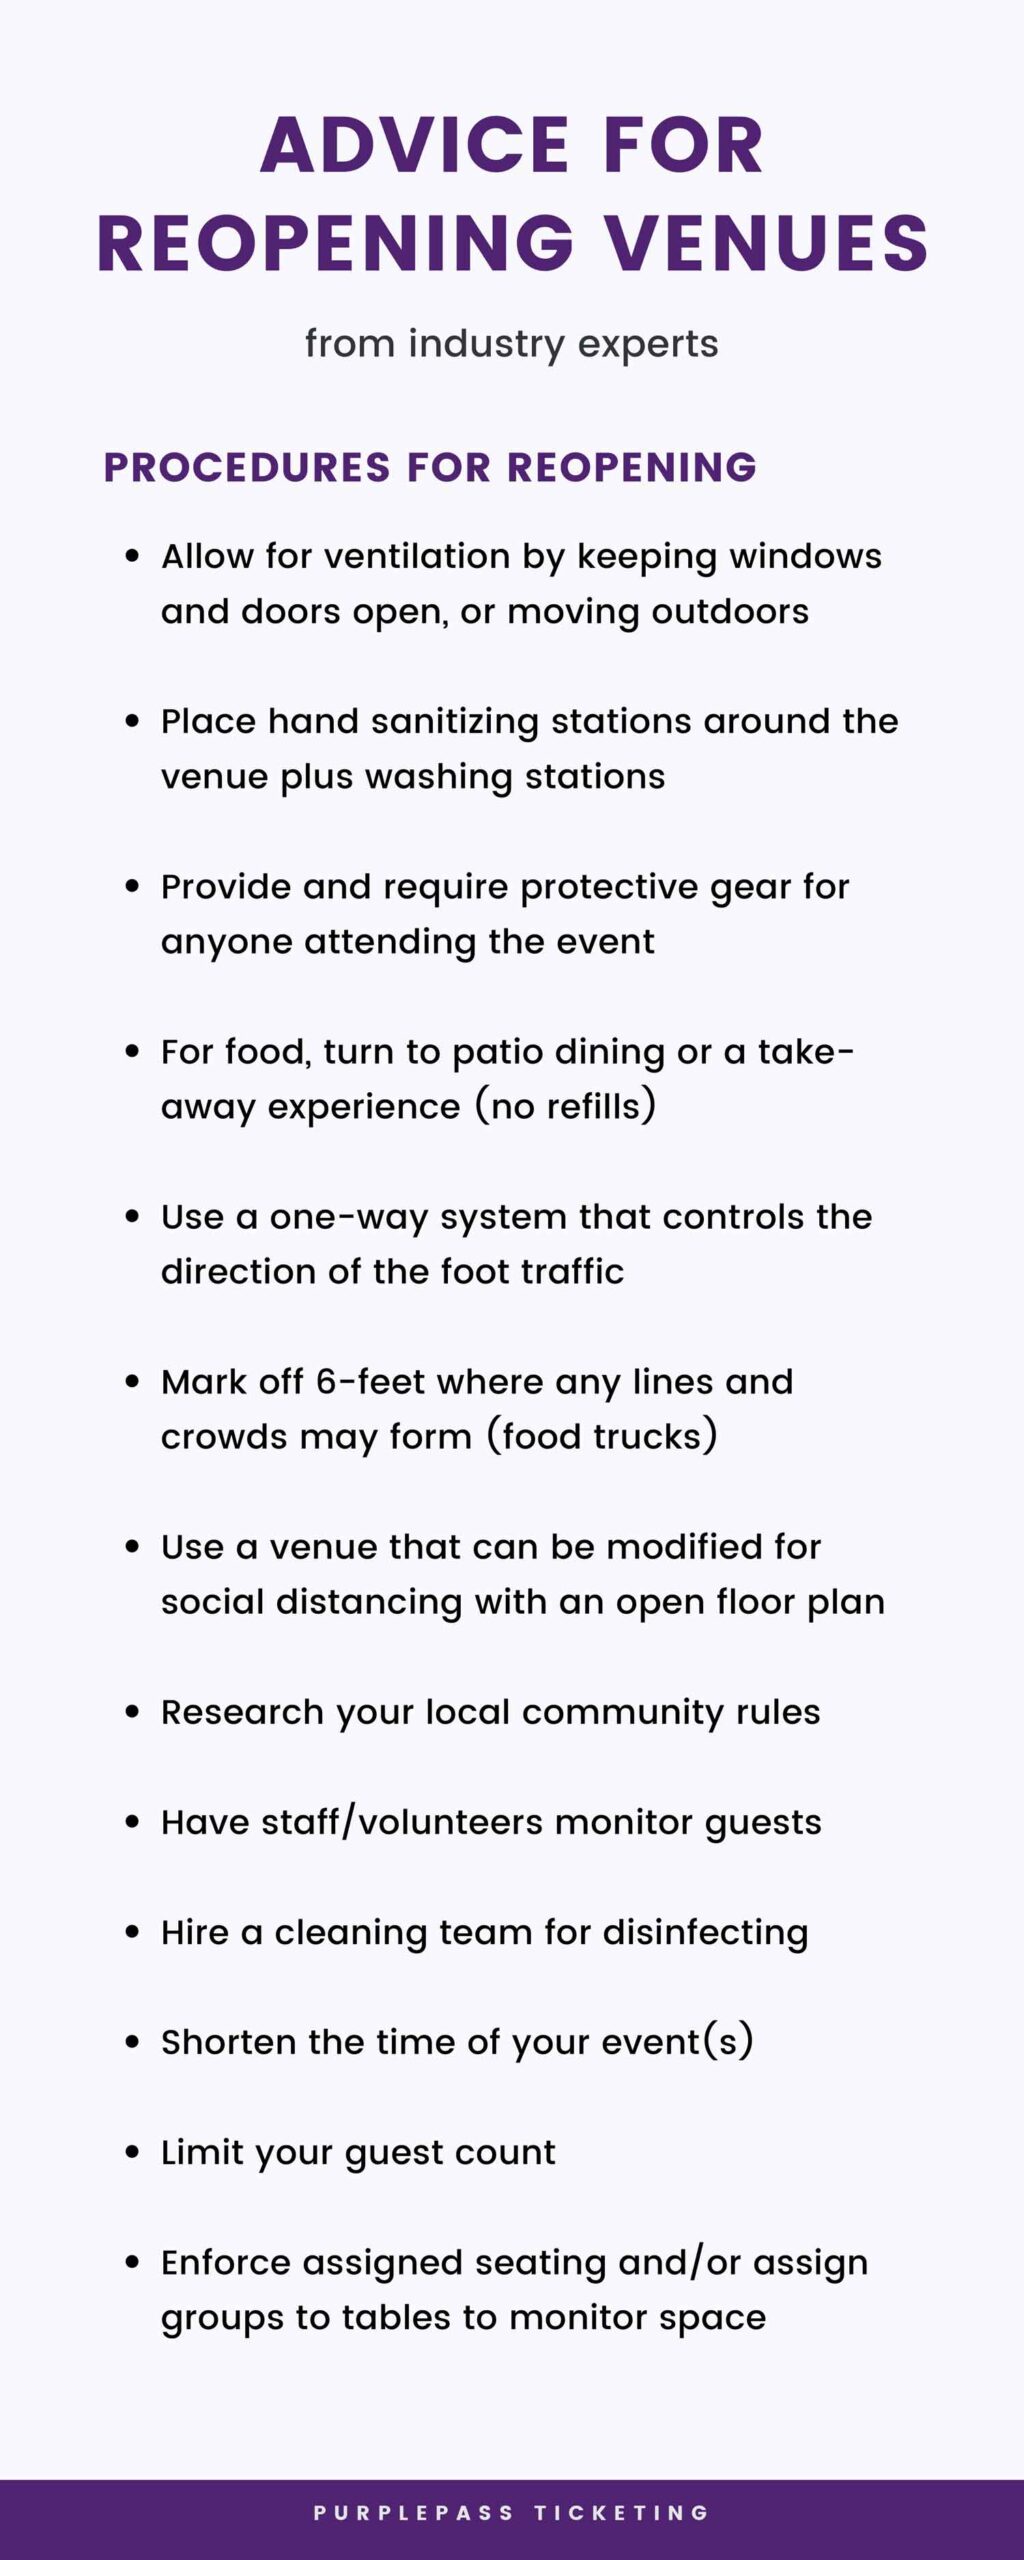 Advice-for-reopening-venues-infographic